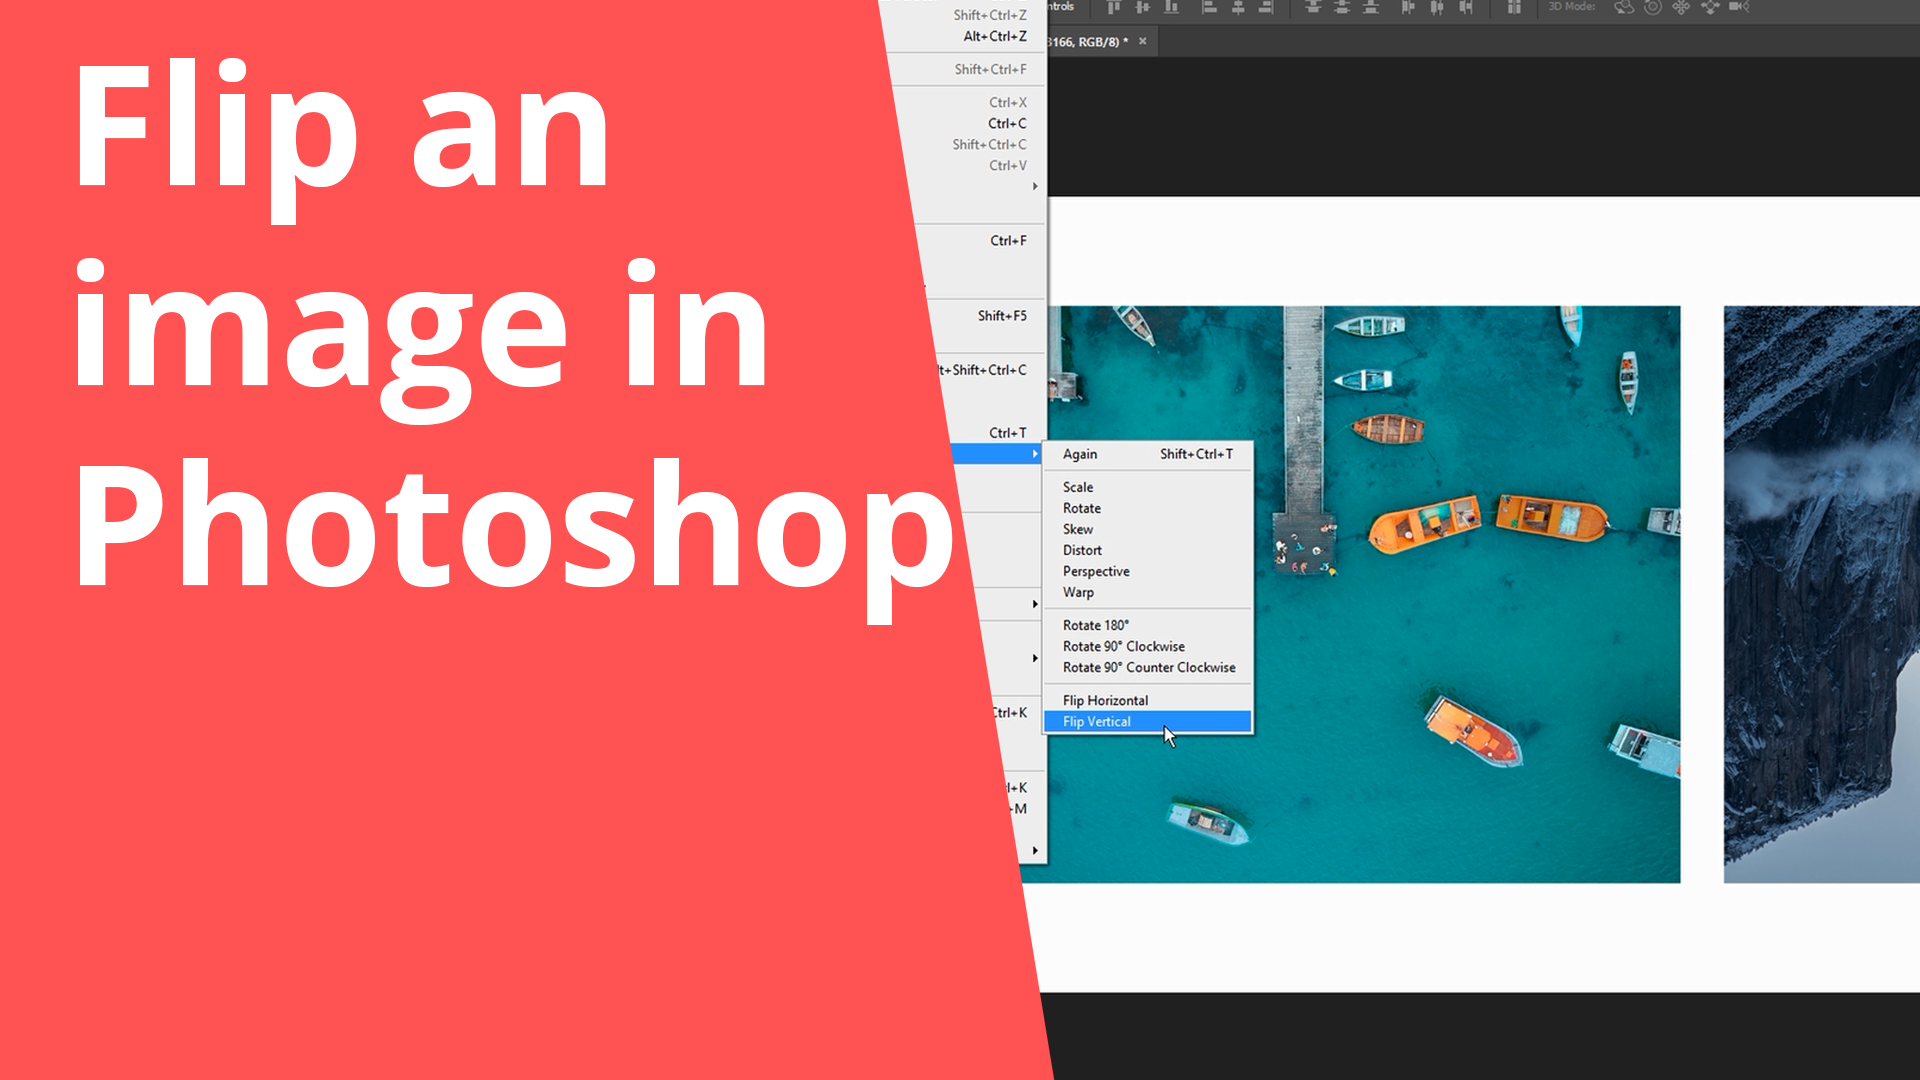 Flip an image in Photoshop